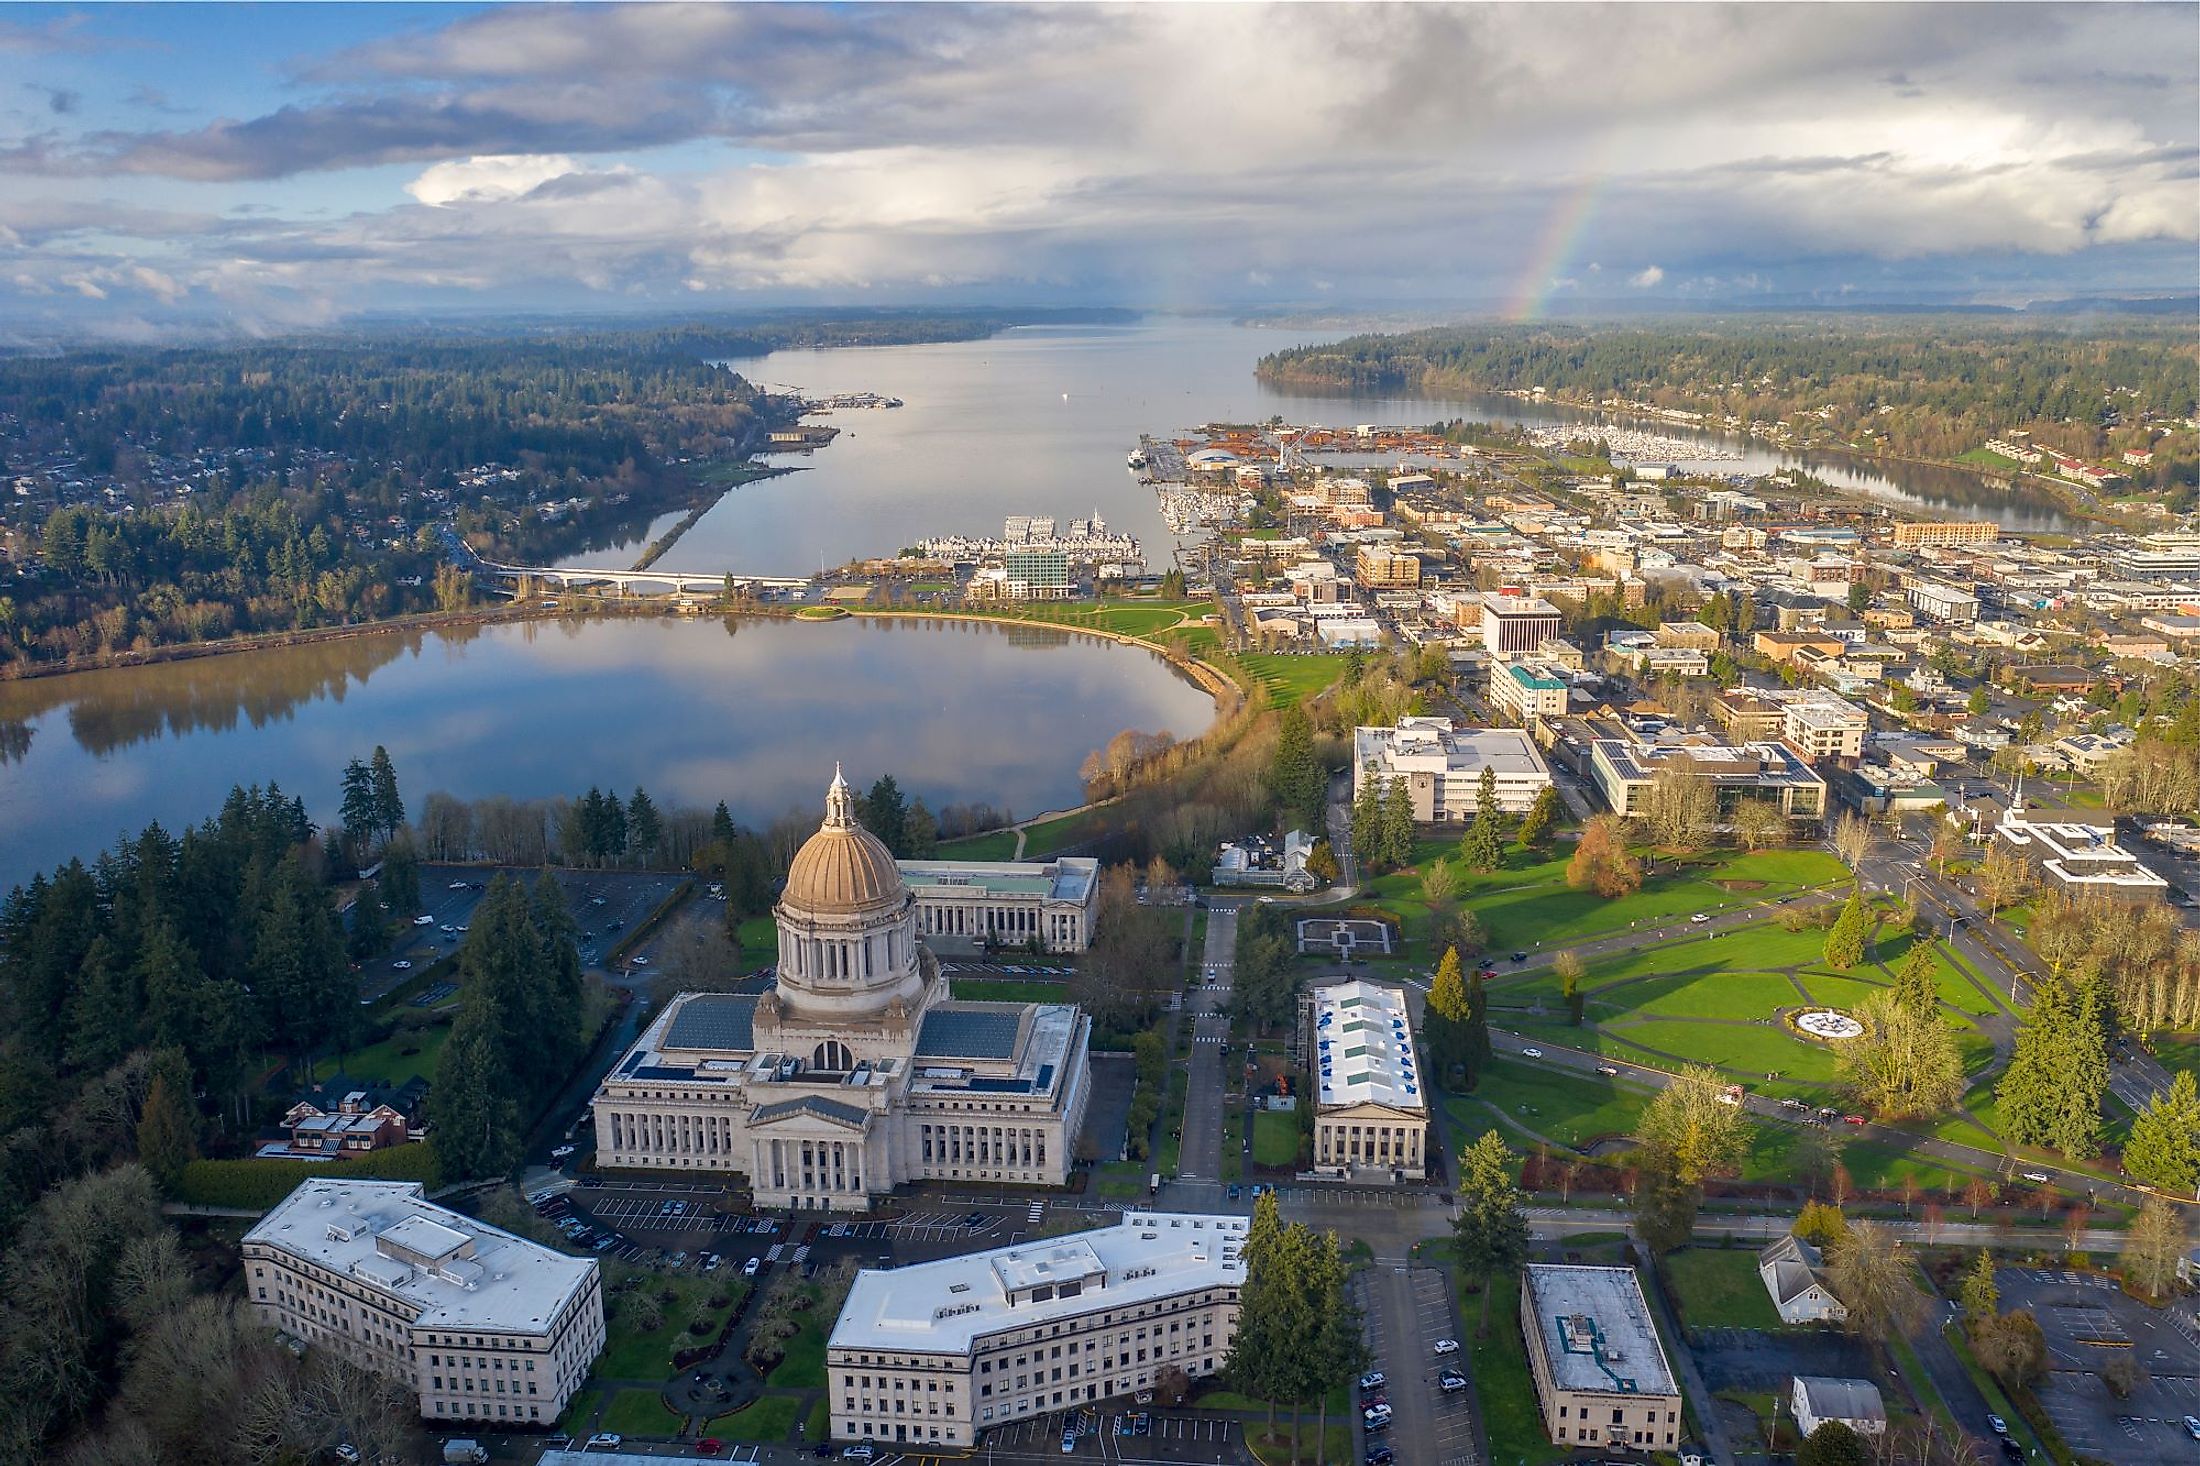 The City of Olympia in Washington State.